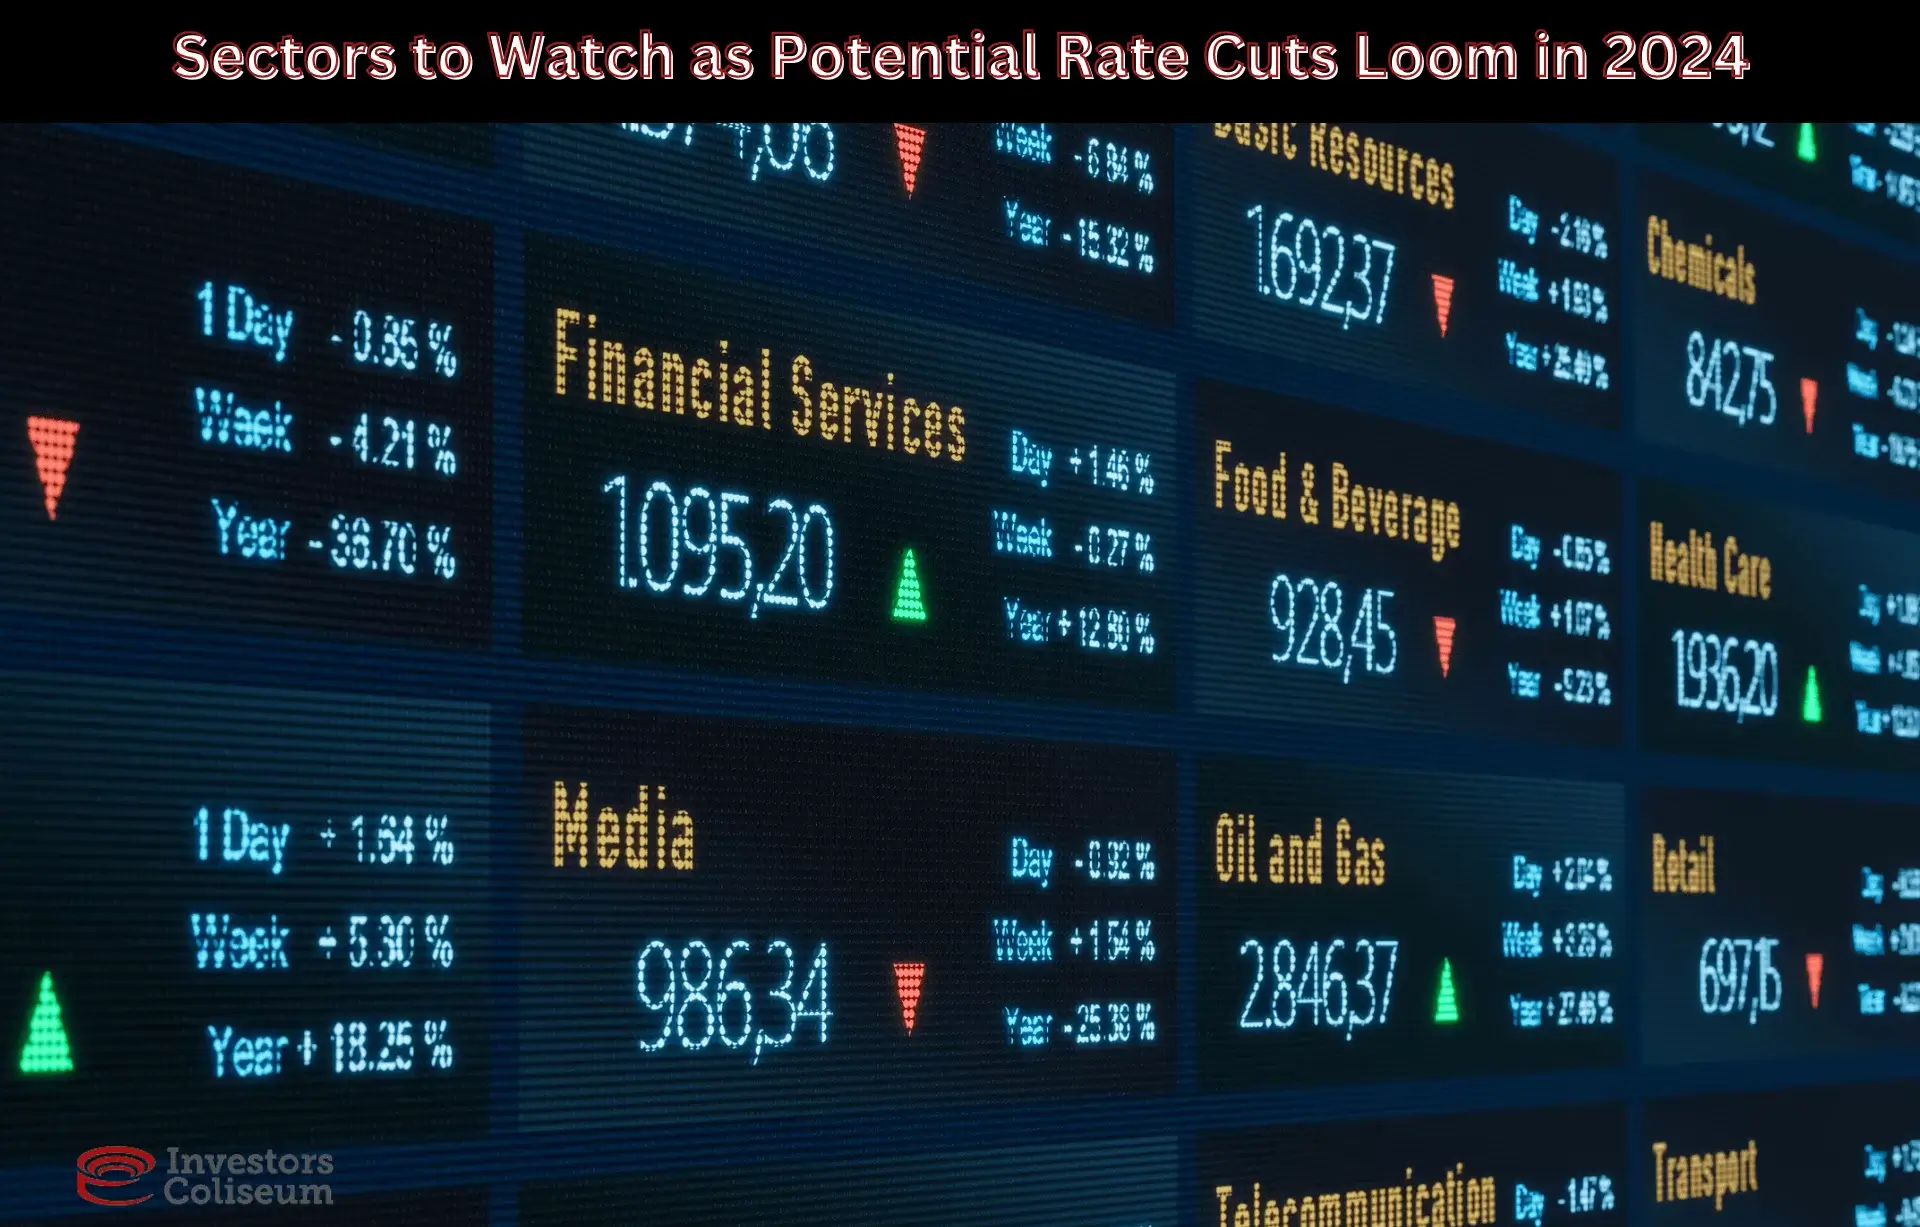 Sectors to Watch as Potential Rate Cuts Loom in 2024